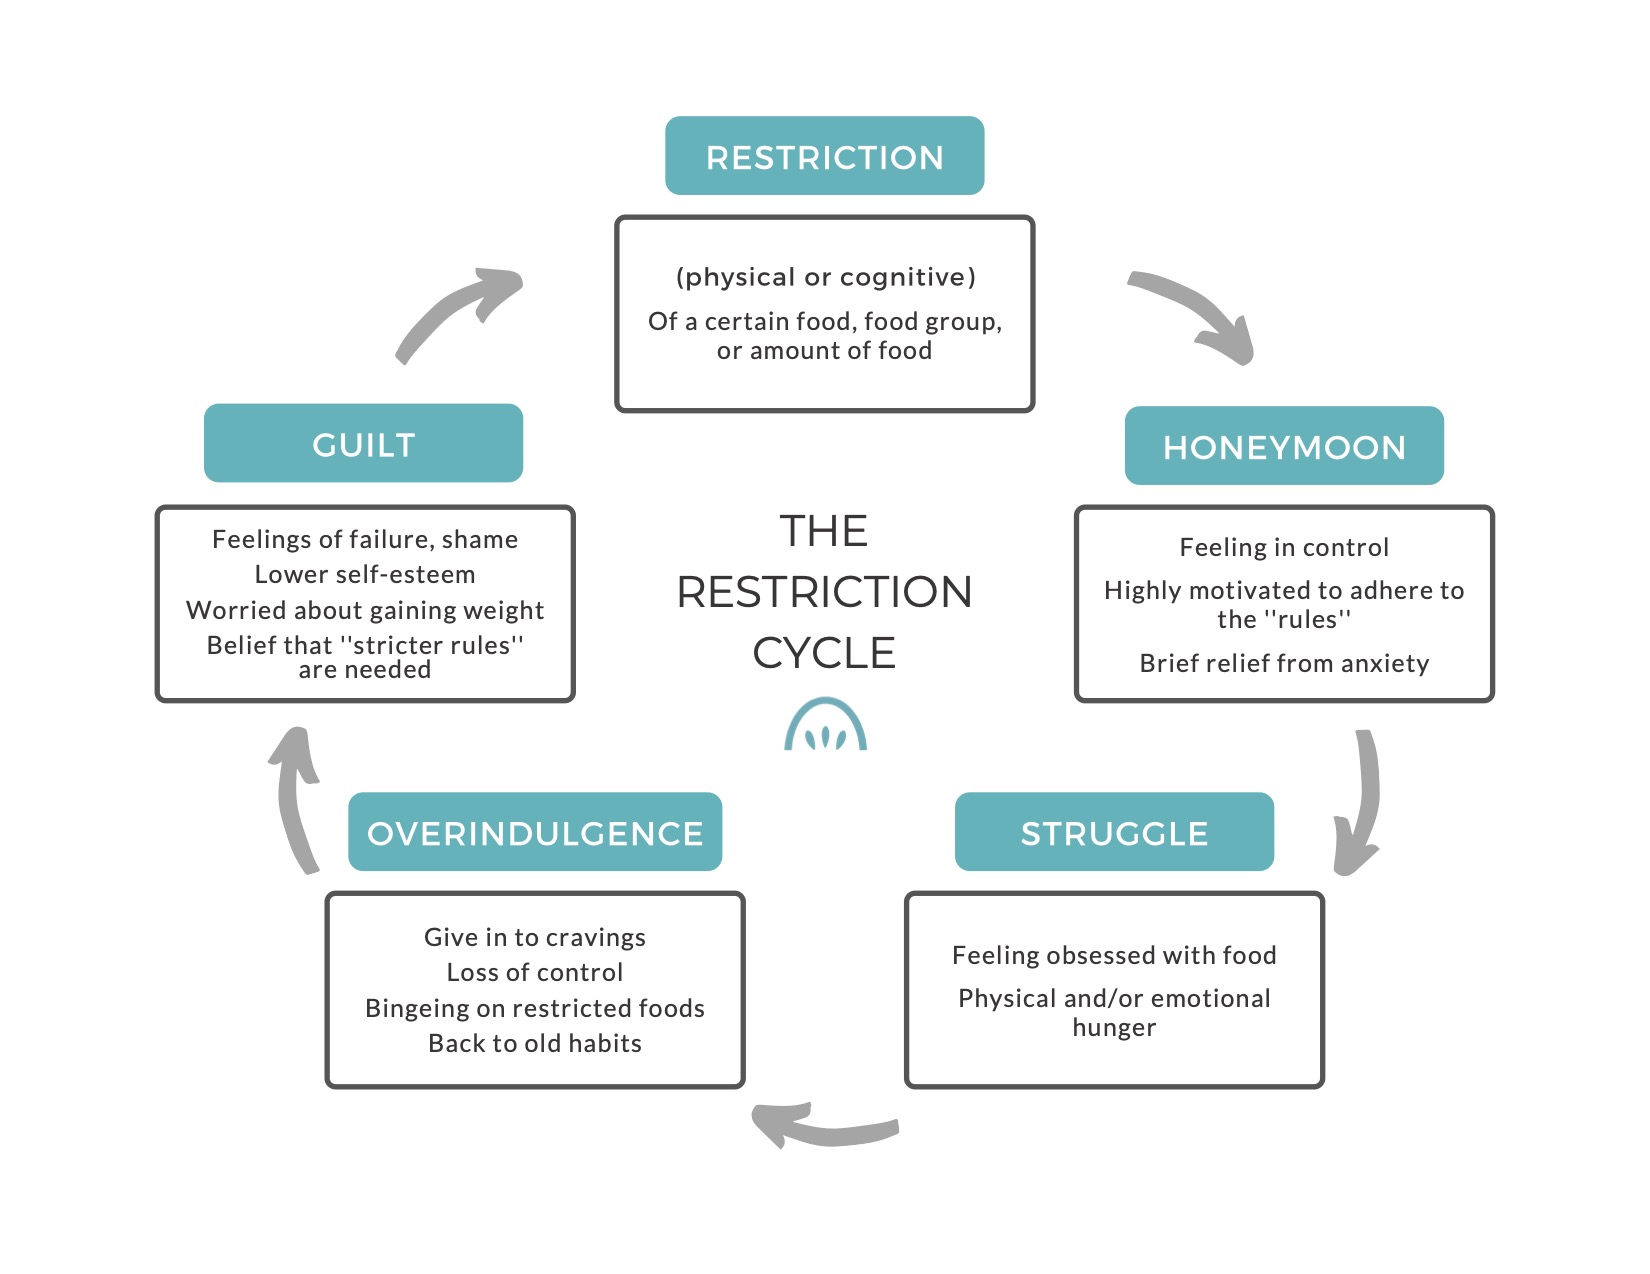 The restriction cycle by TeamNutrition